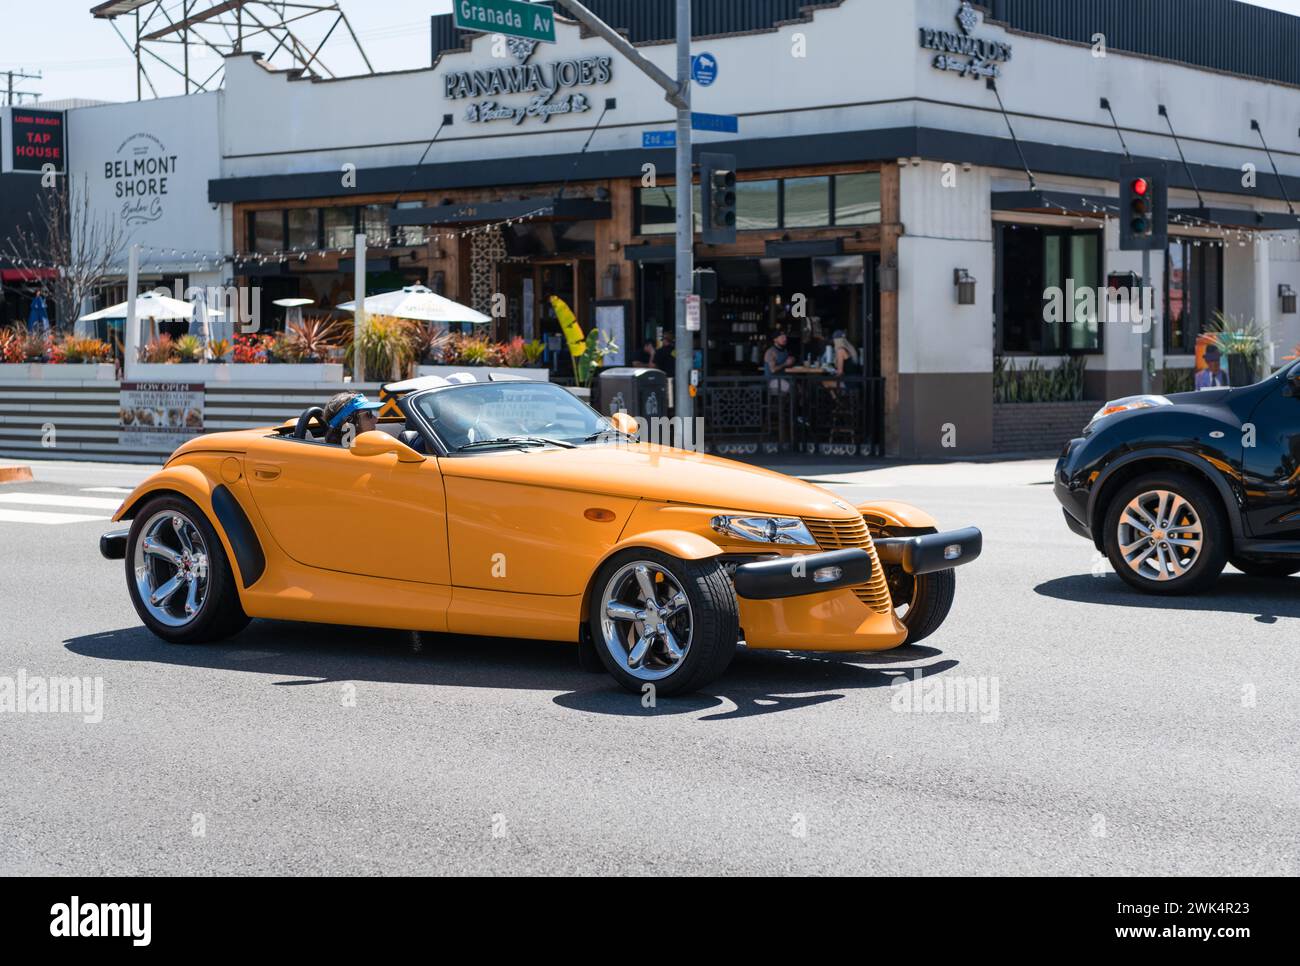 Long Beach, California USA - March 31, 2021: classic car of yellow Chrysler Plymouth Prowler on road Stock Photo